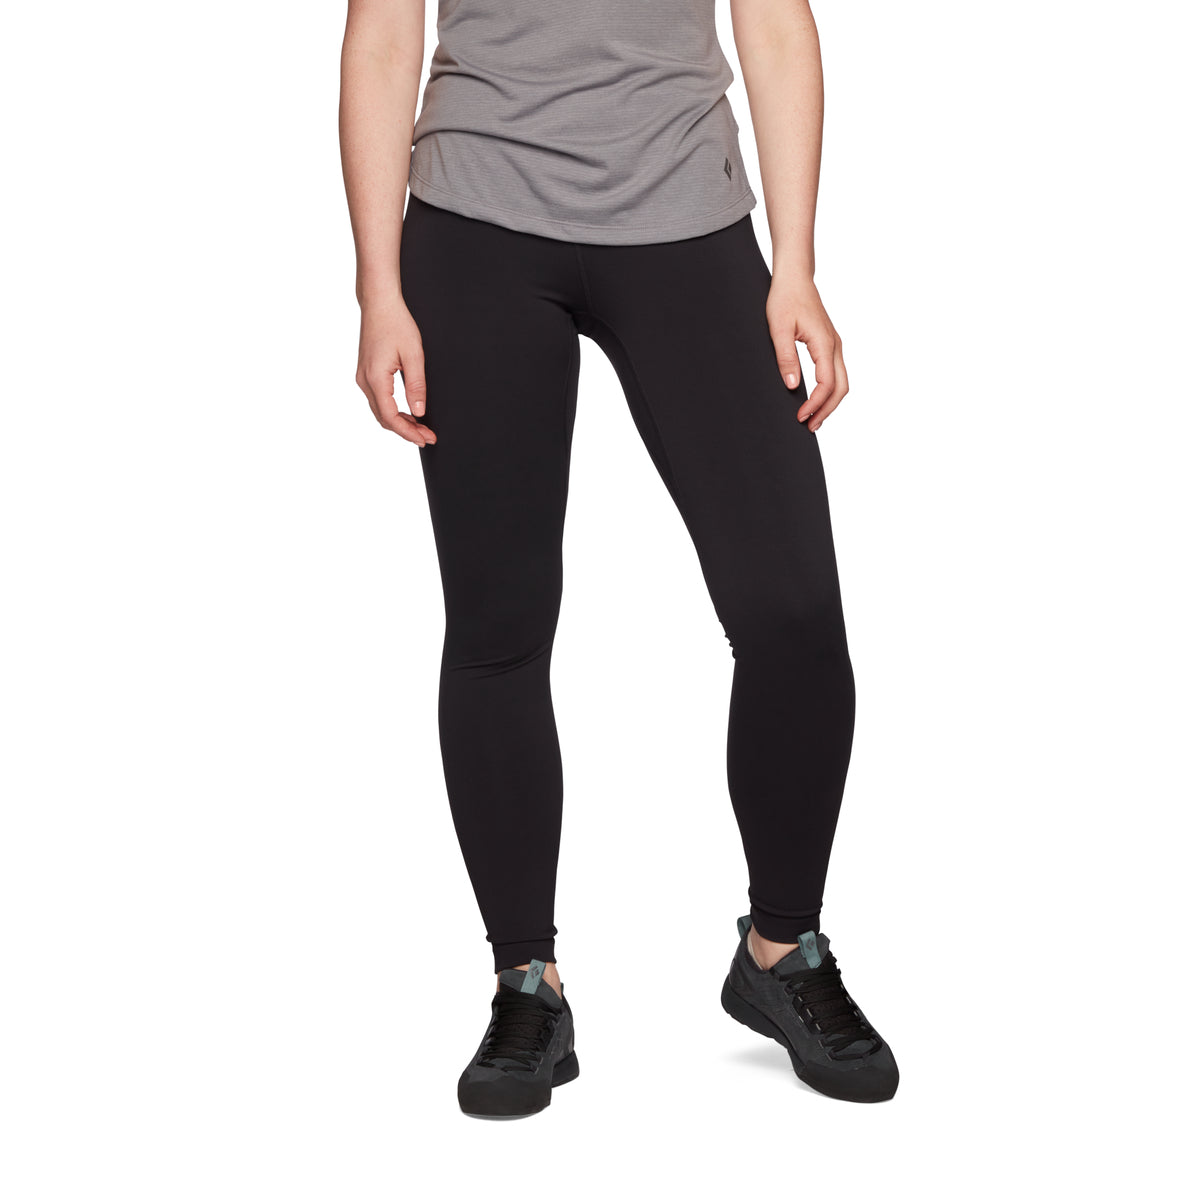 Session Tights - Women's